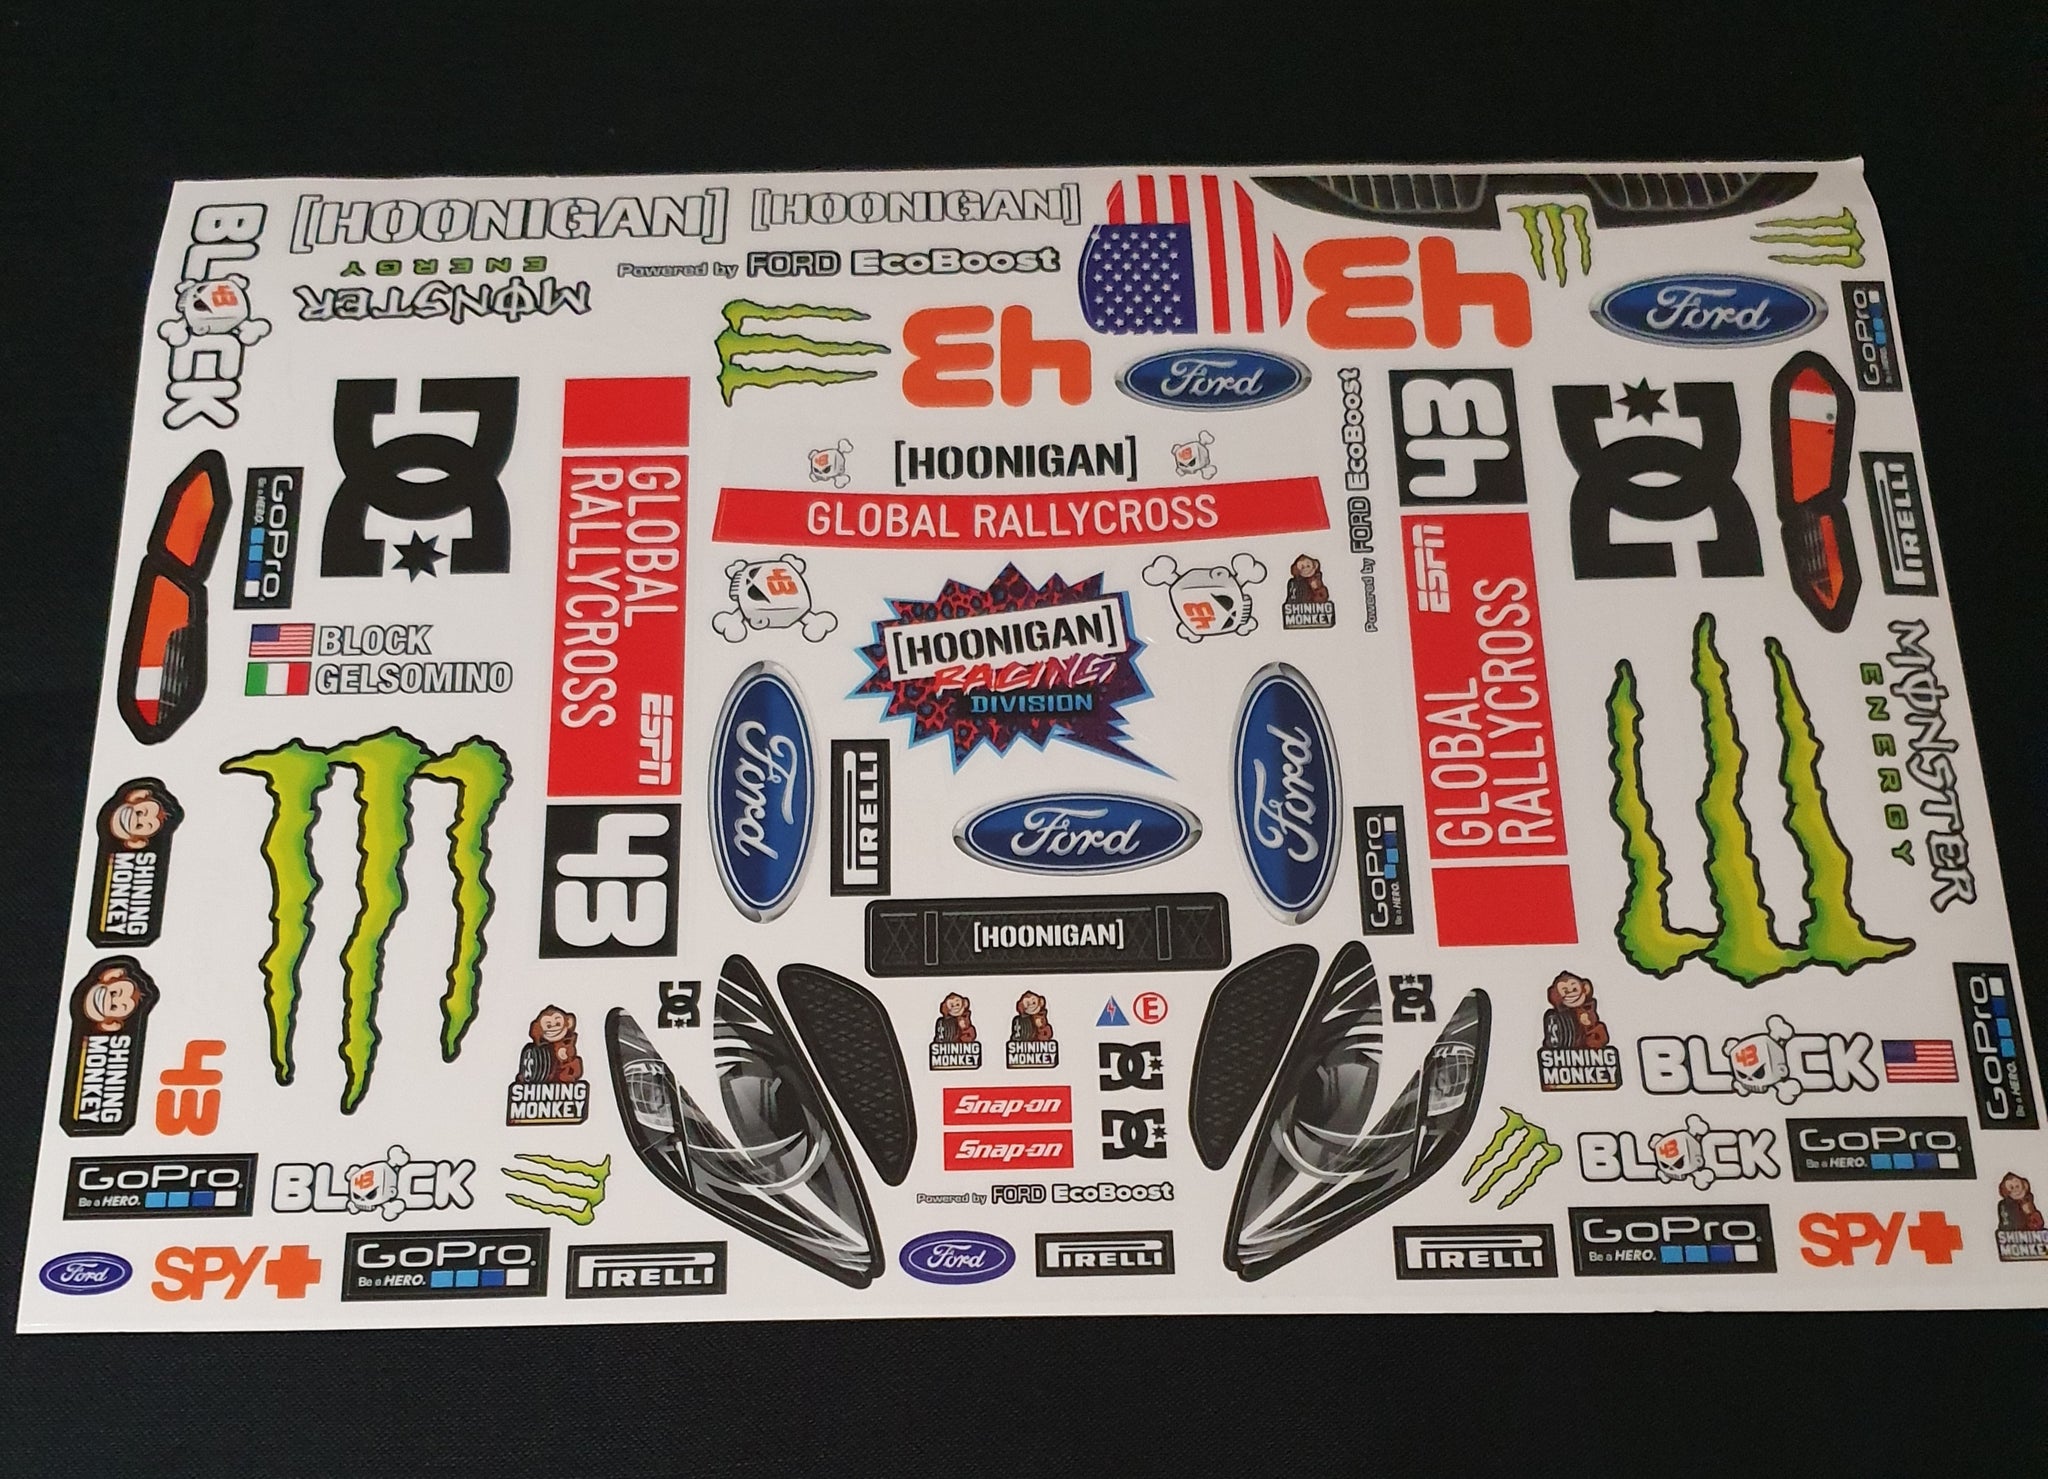 Fiesta m chassis monster decals - L&L models 